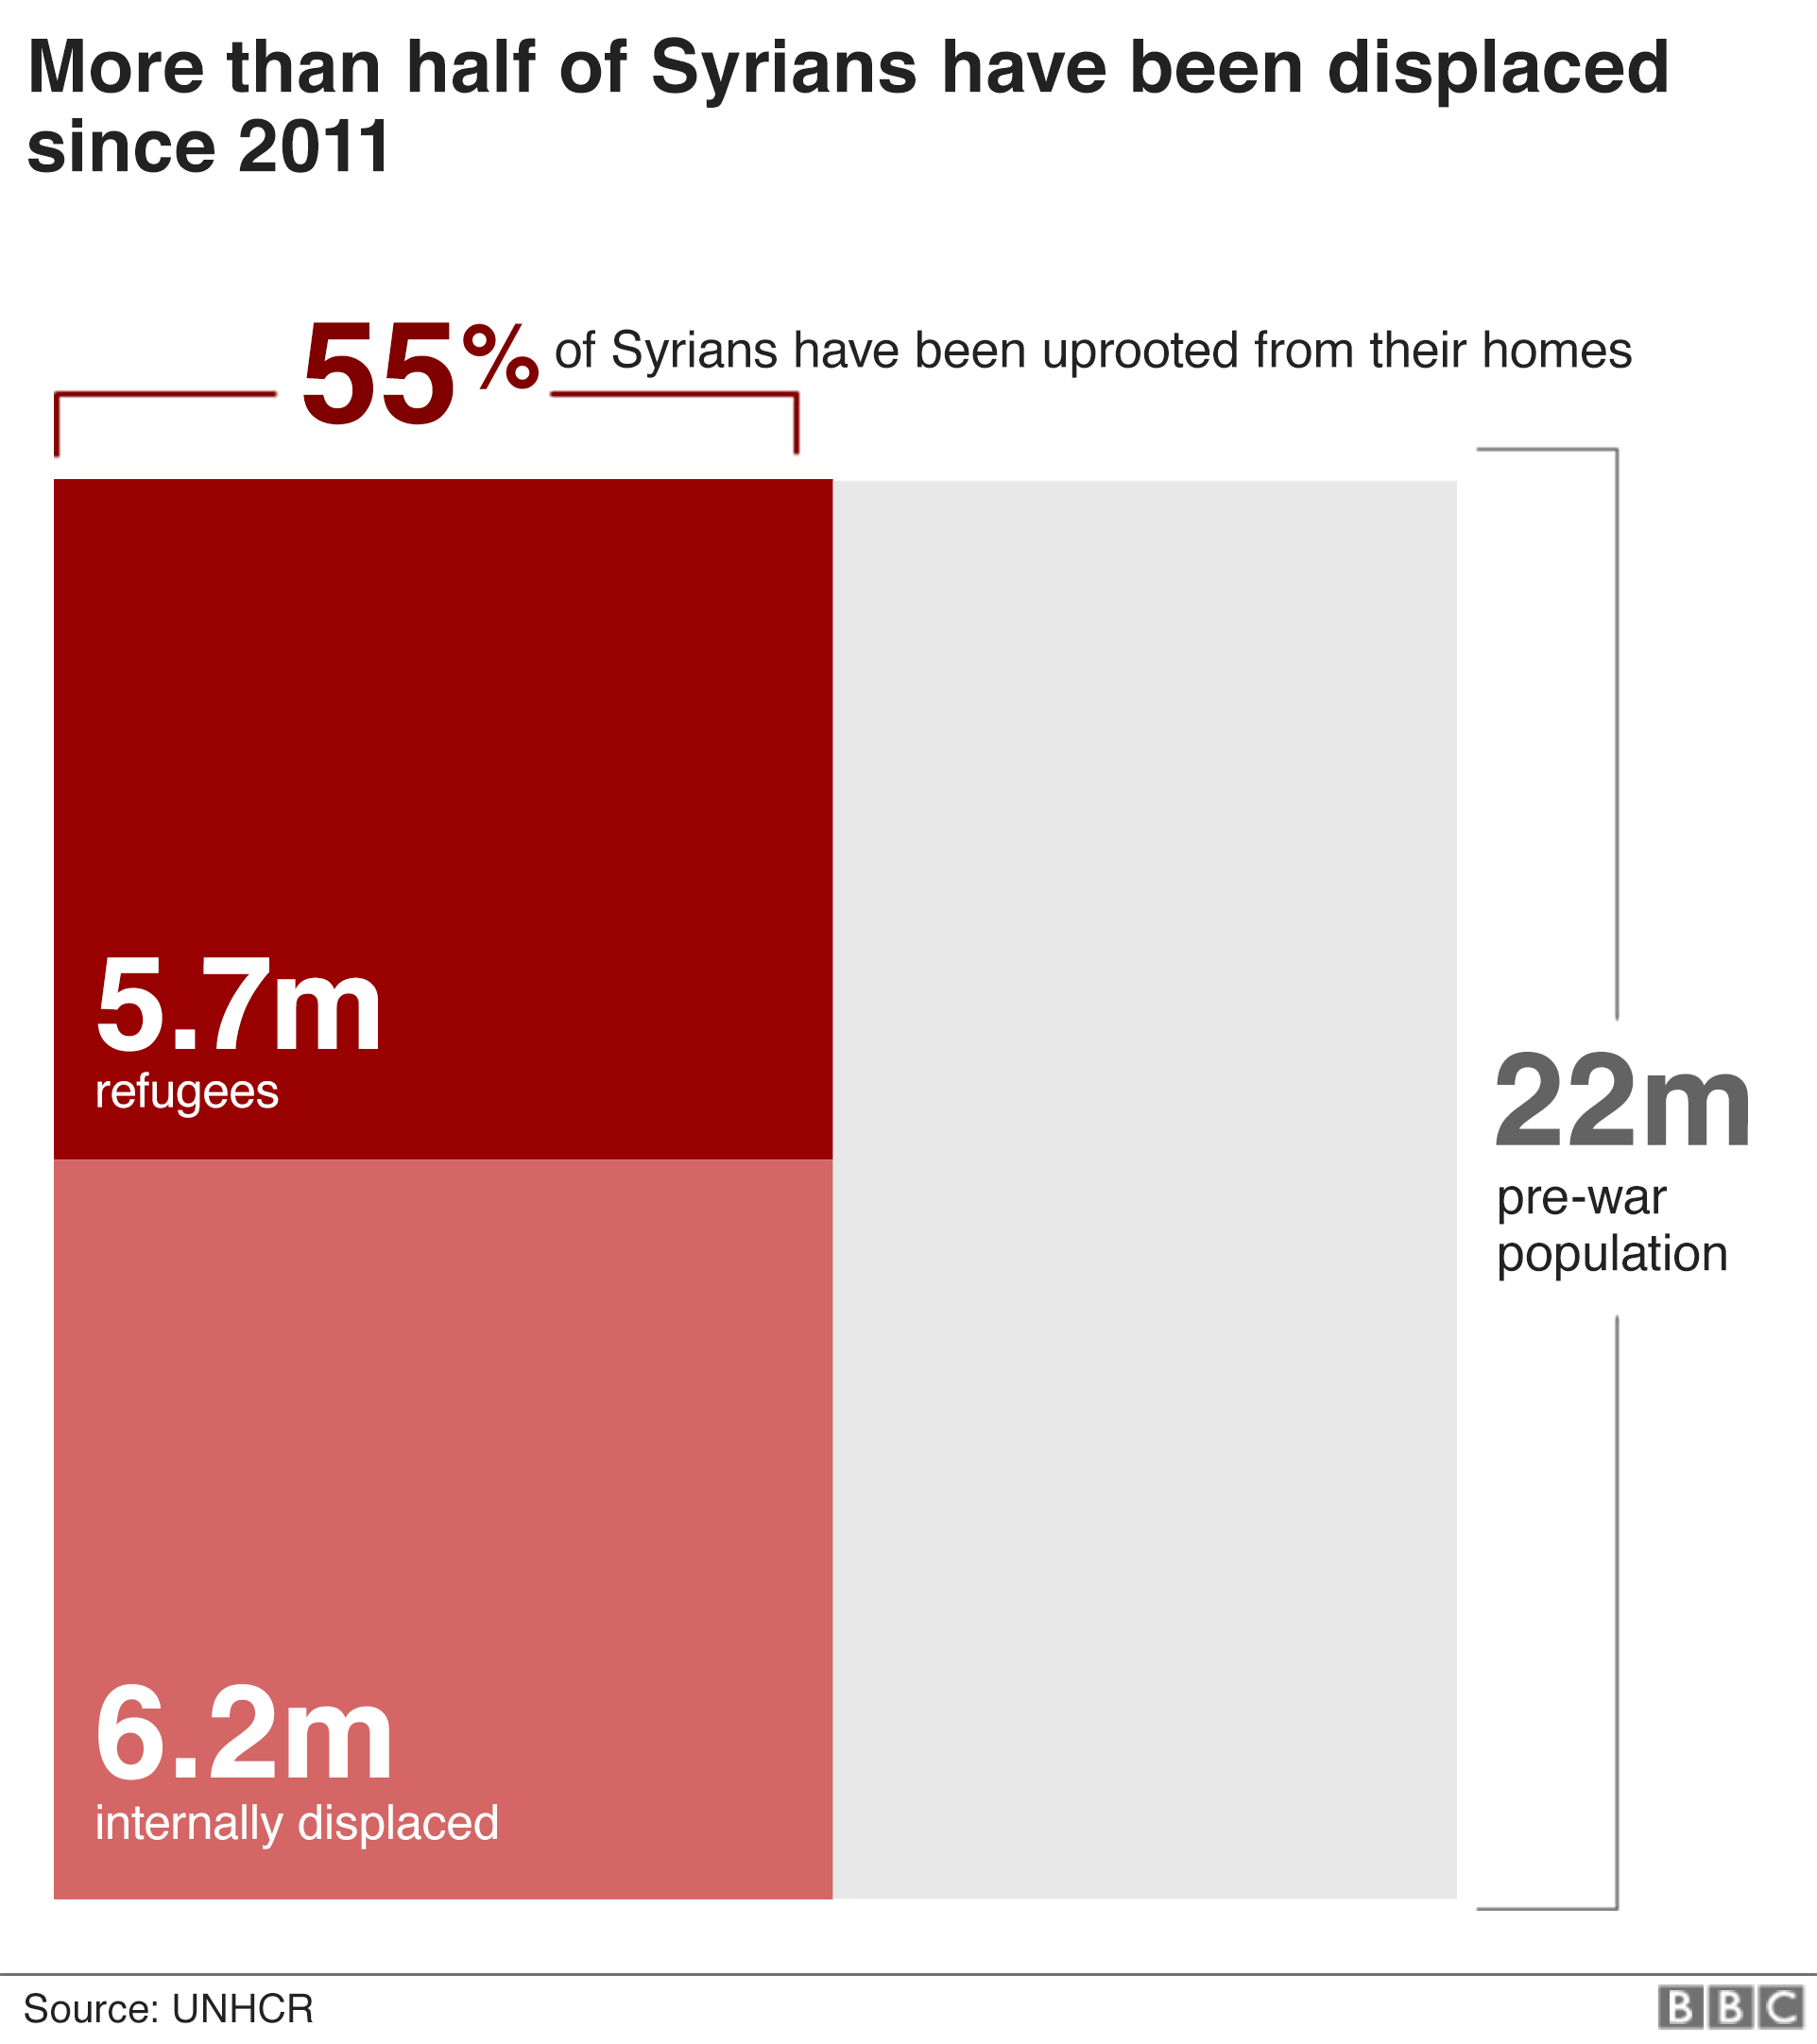 More than half of Syrians have been displaced since 2011.